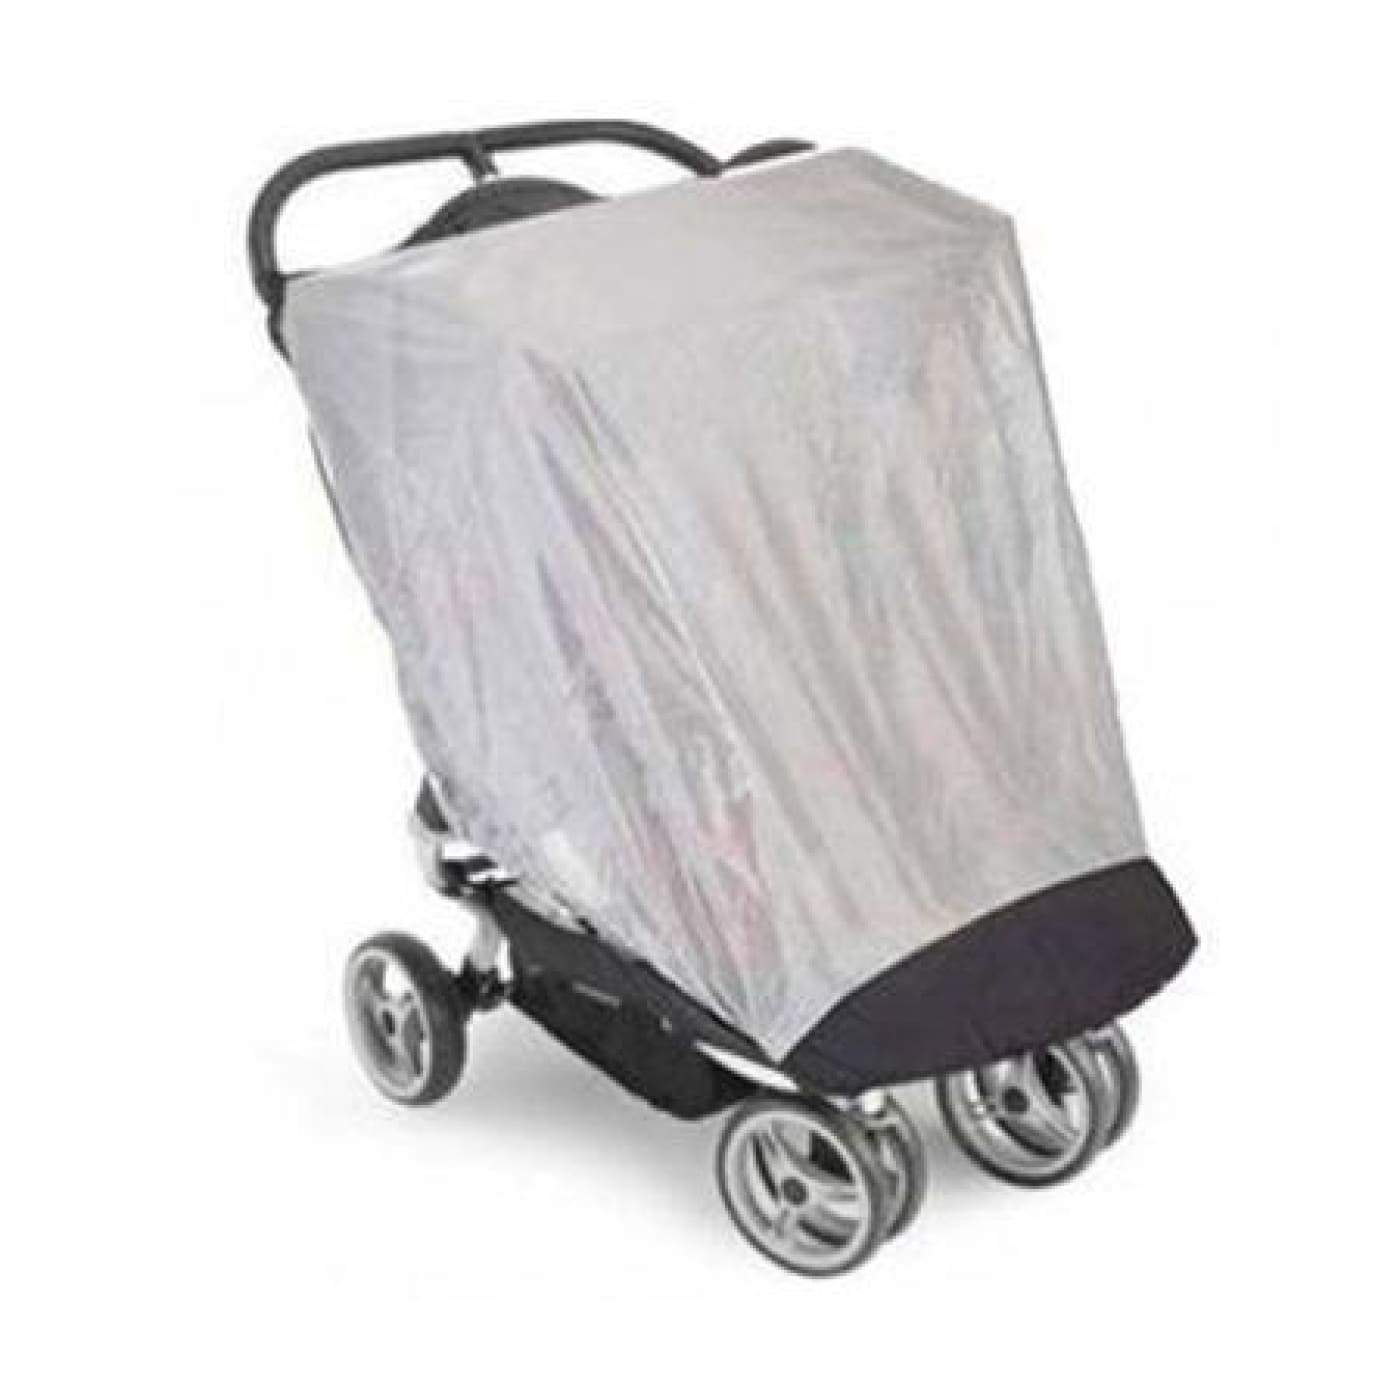 Baby Jogger City Mini/GT Double Bug Cover - PRAMS & STROLLERS - SUN COVERS/WEATHER SHIELDS